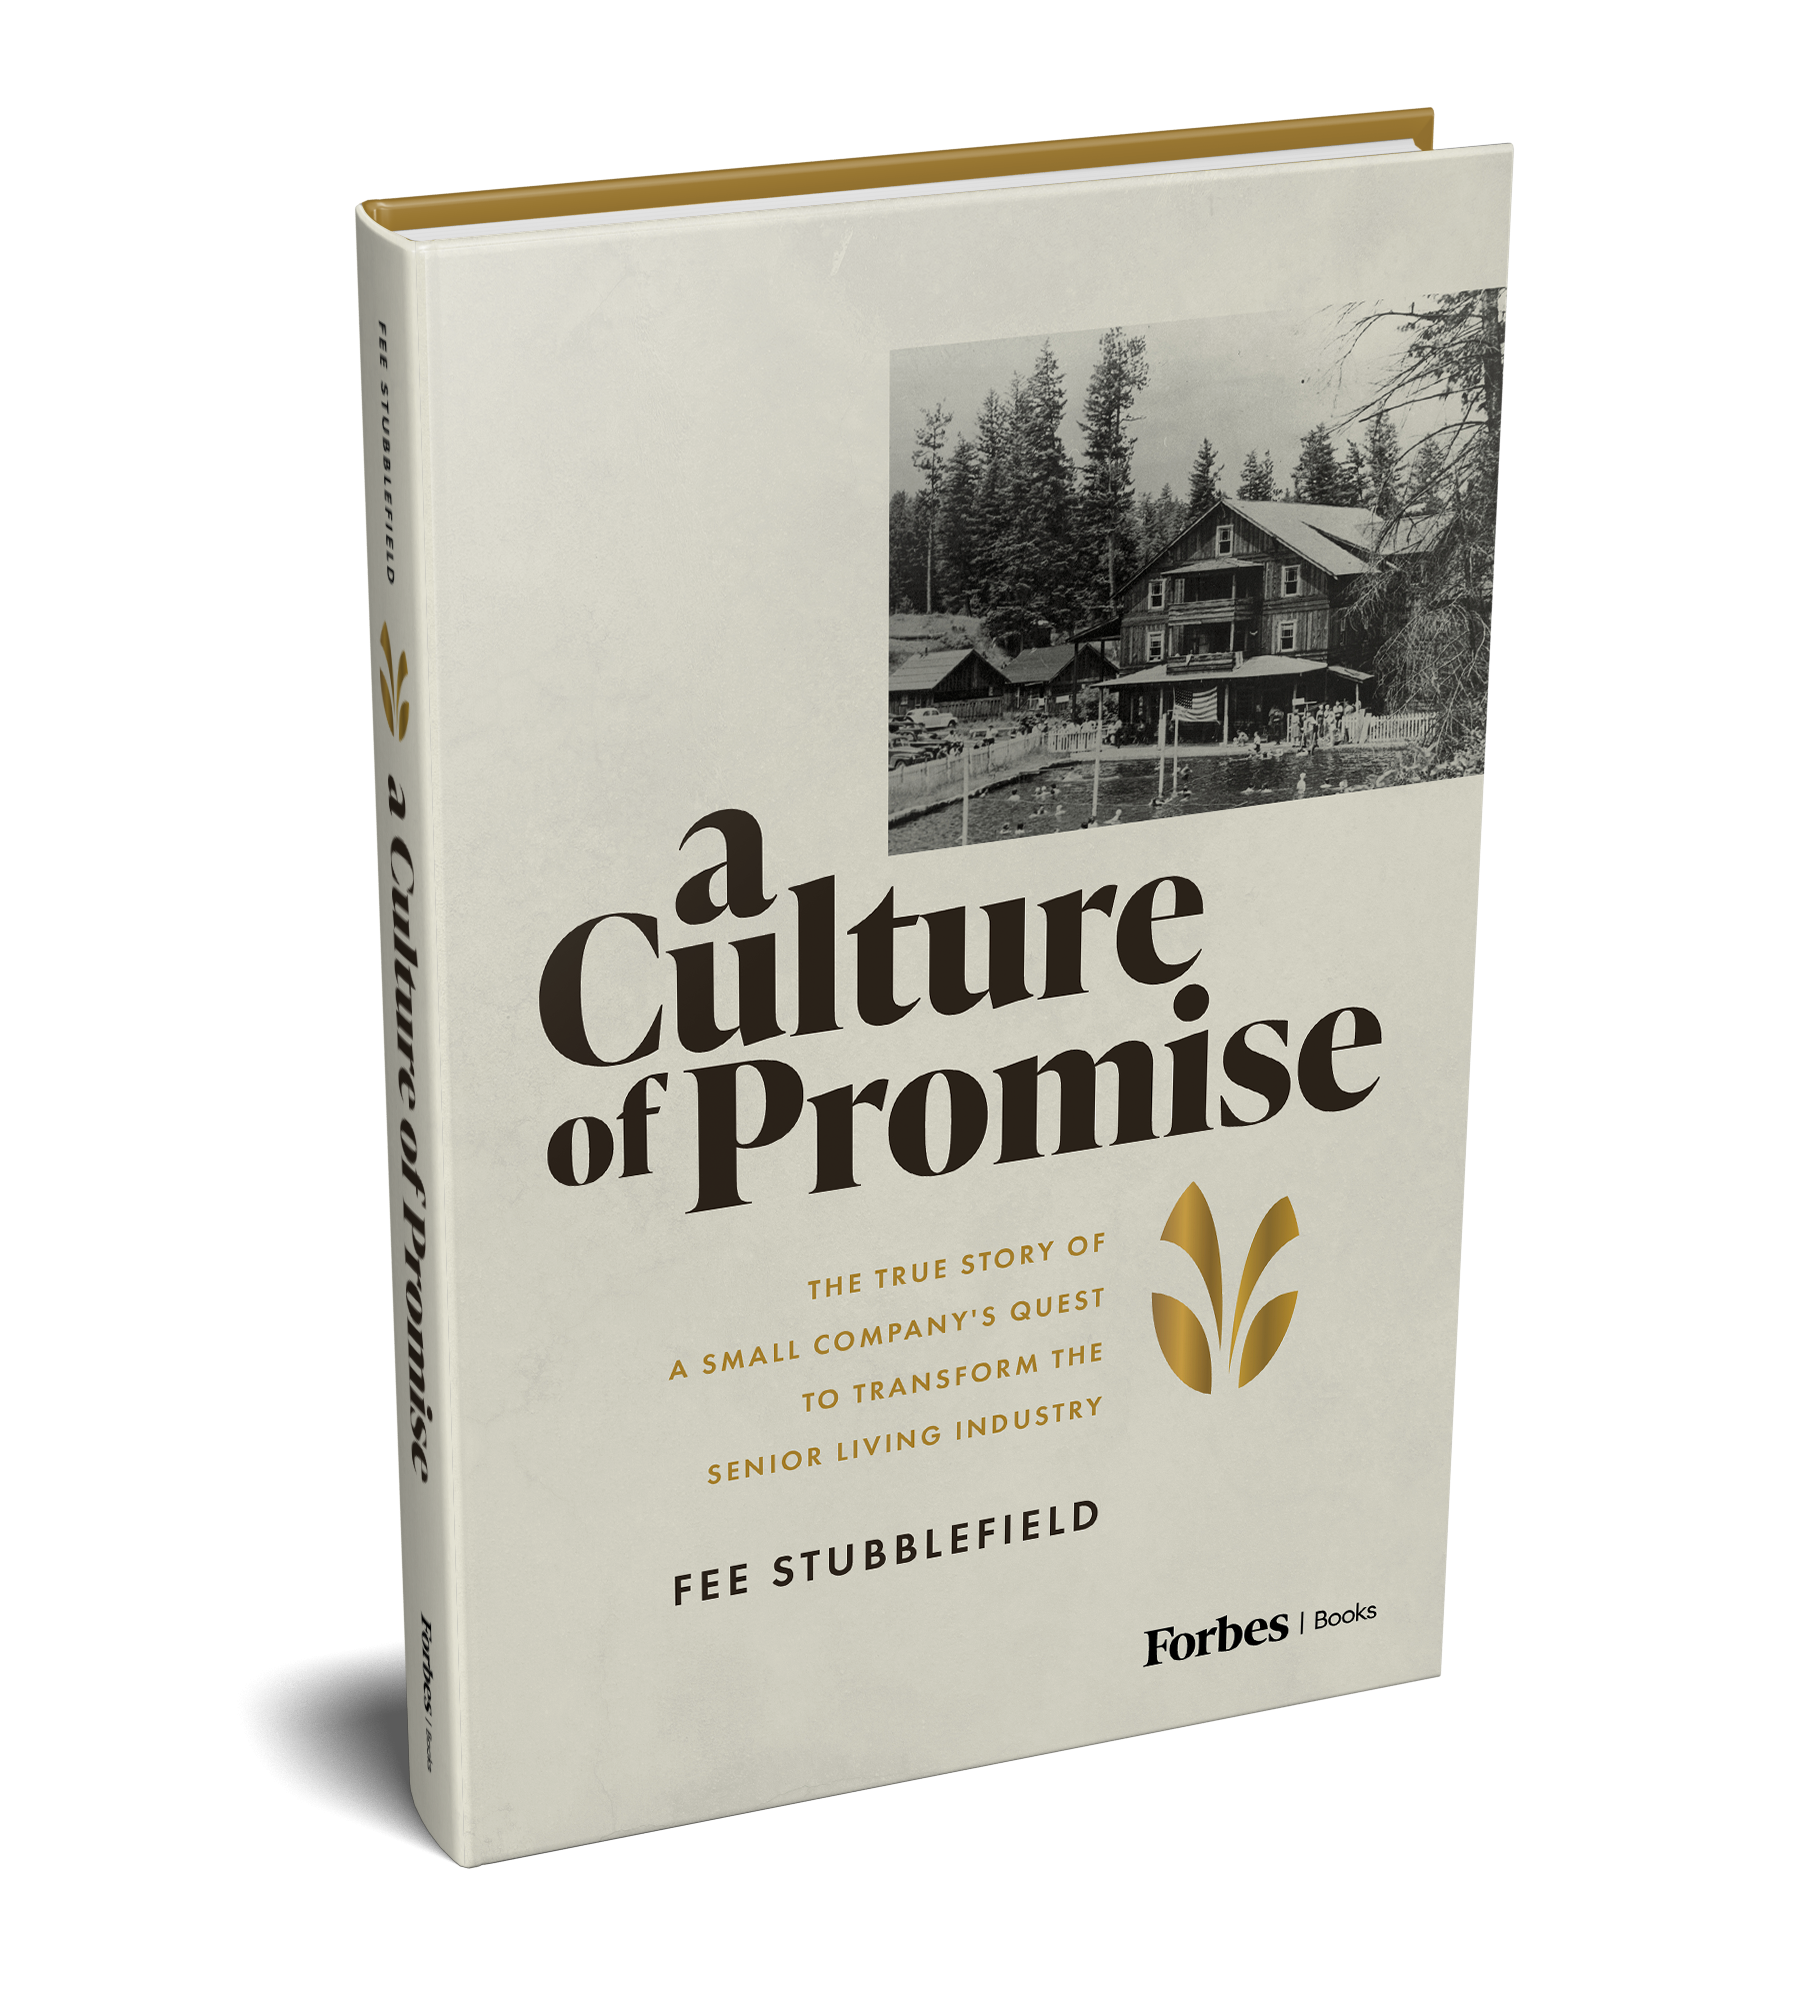 “A Culture of Promise” by Fee Stubblefield is released with Forbes Books.